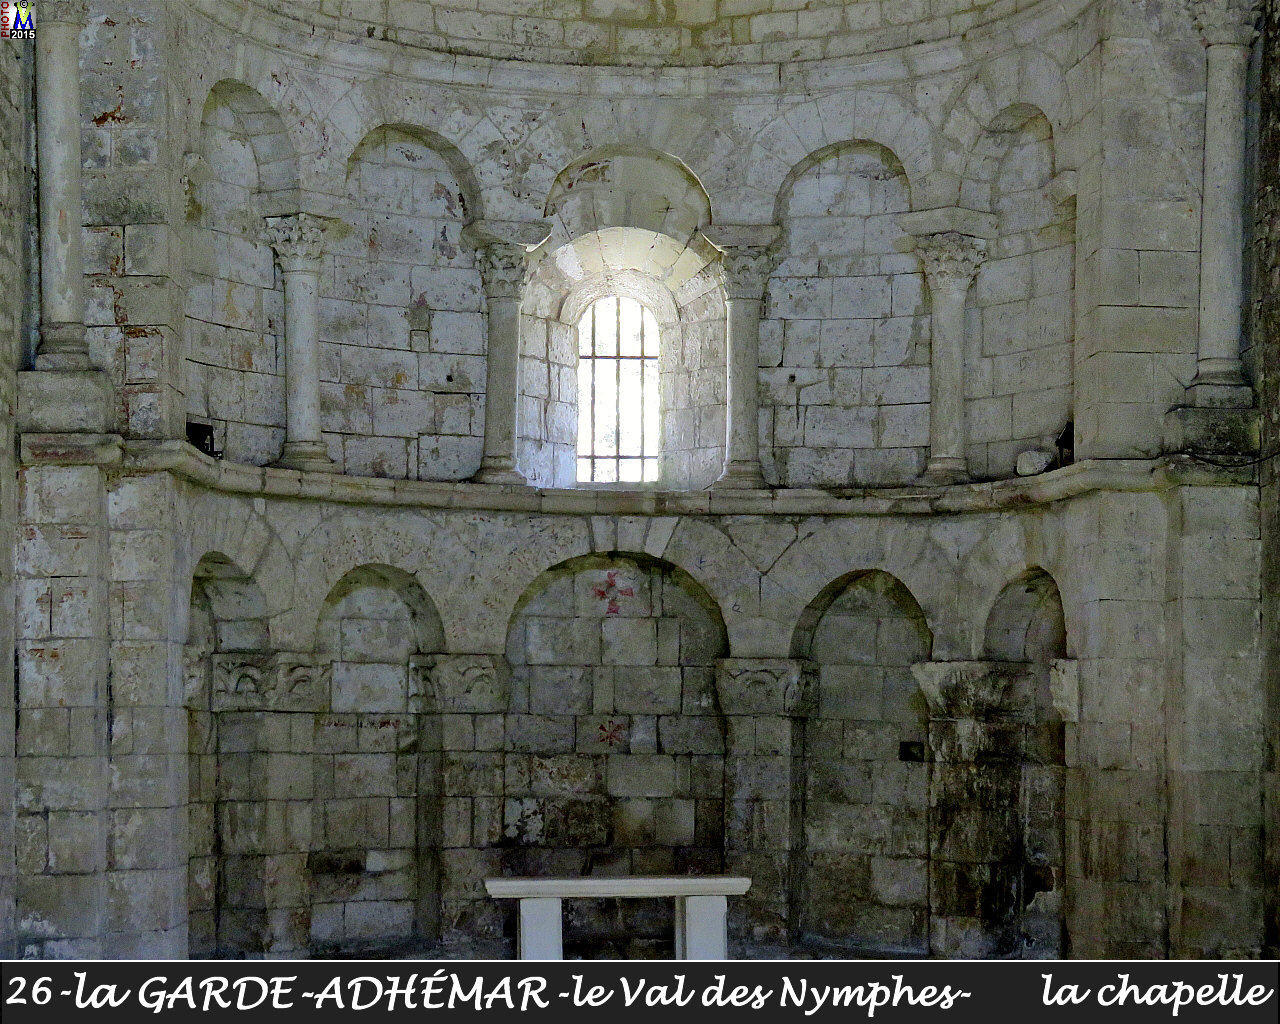 26GARDE-ADHEMARzVAL-NYMPHES_chapelle_202.jpg